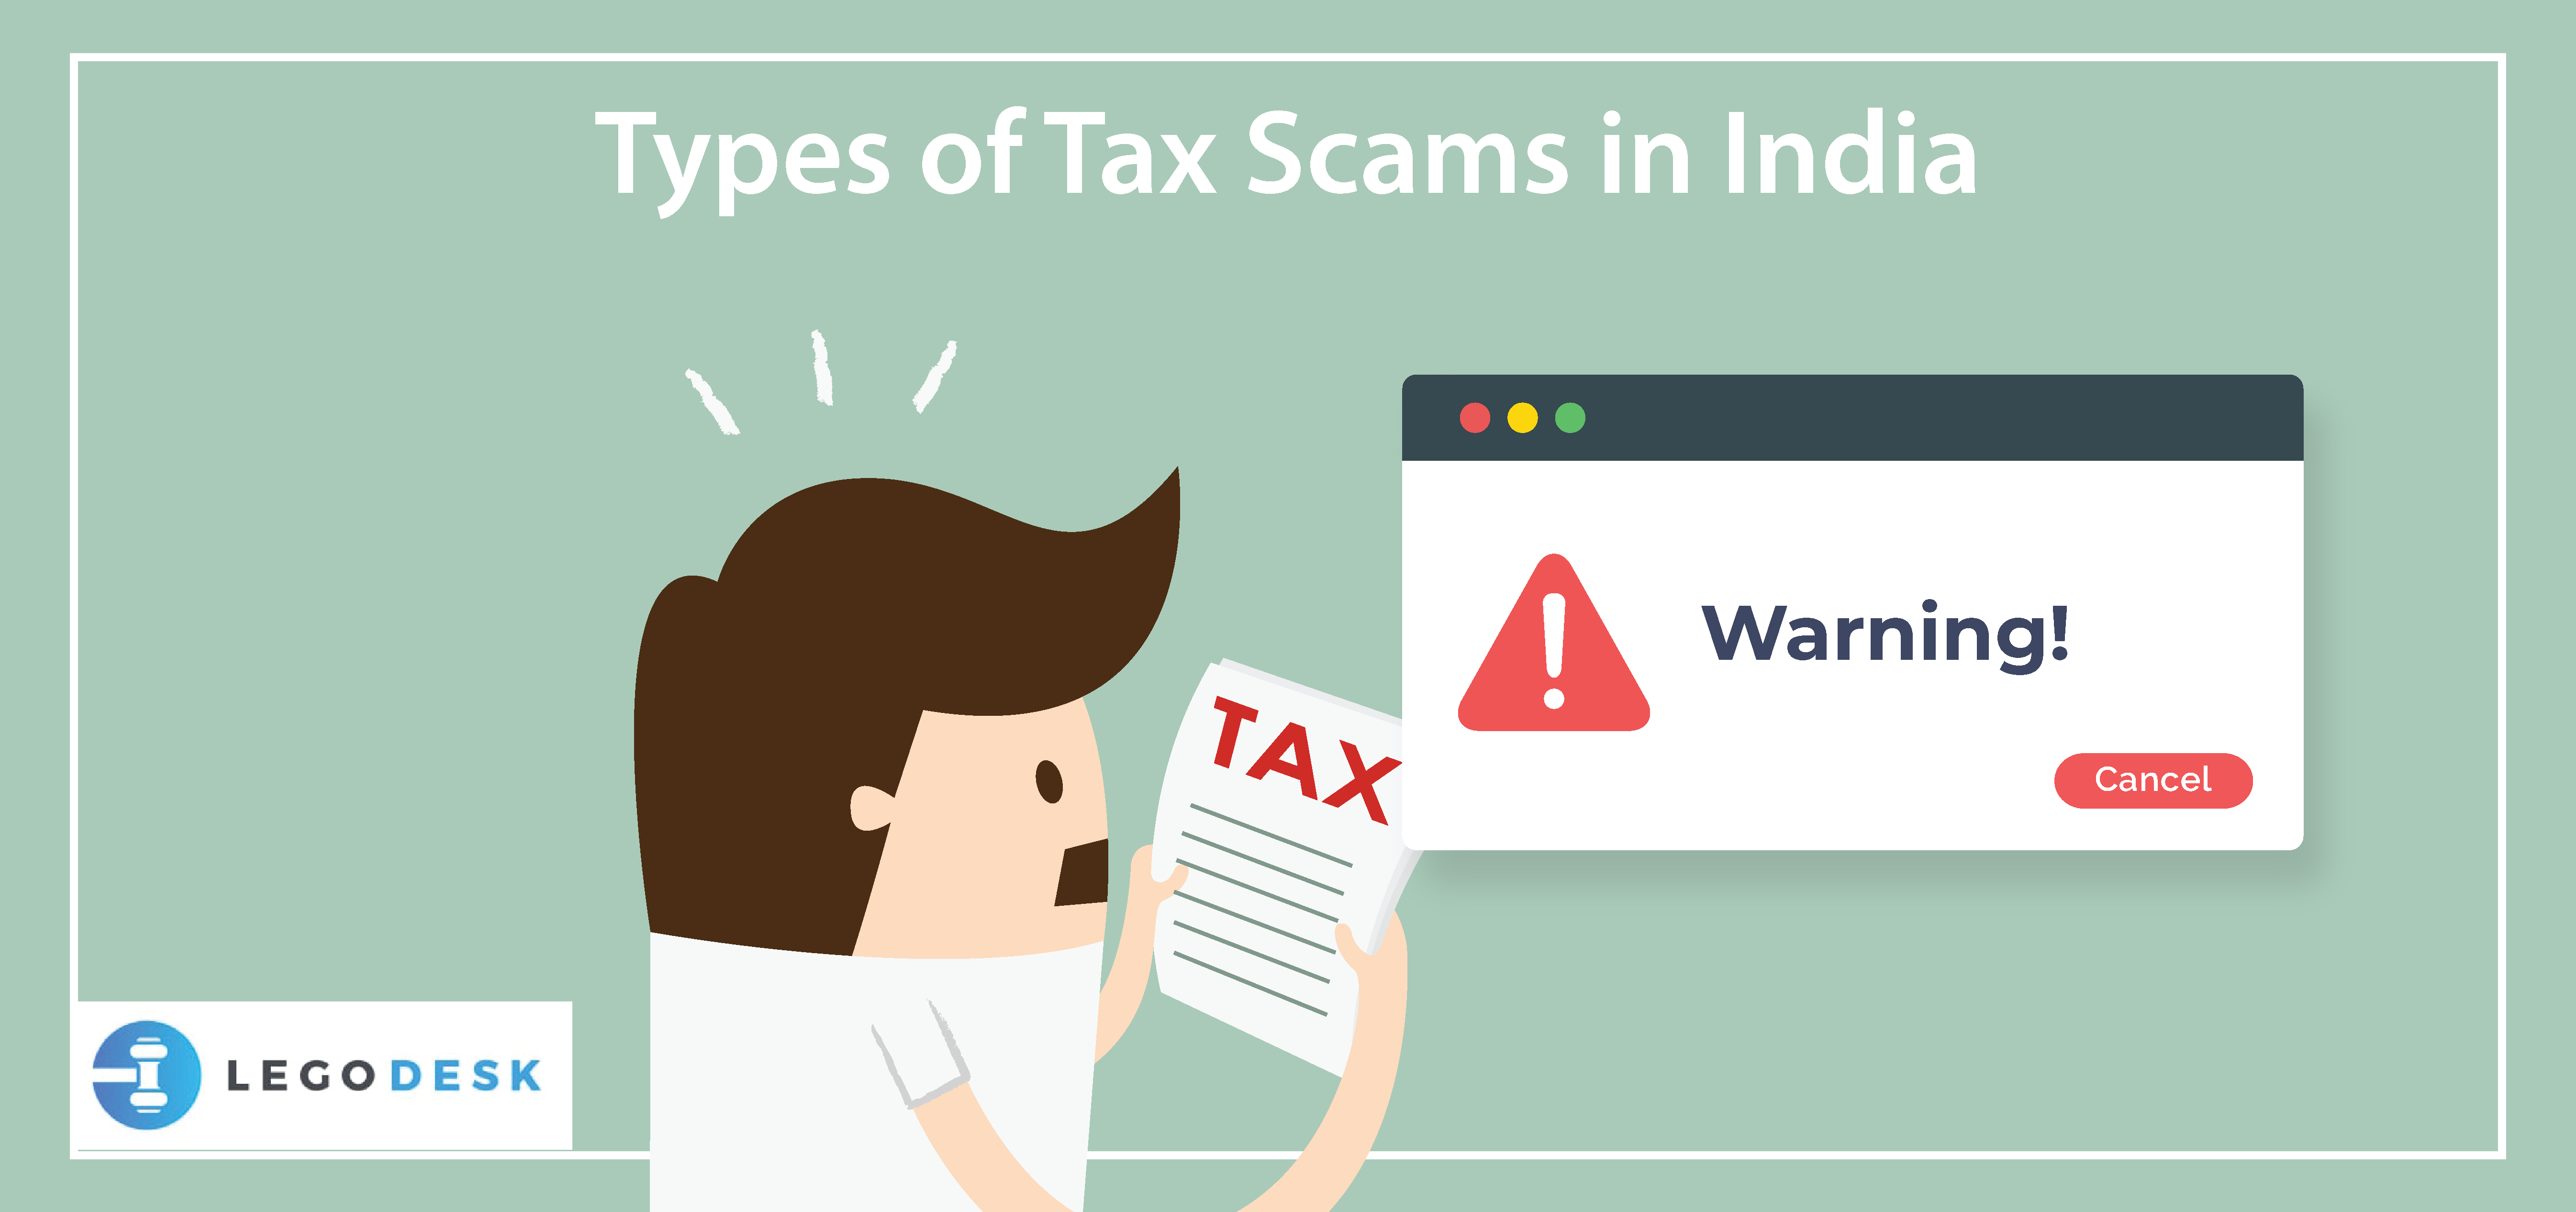 Taxpayers Don’t Fall For These Types of Tax Scams in India